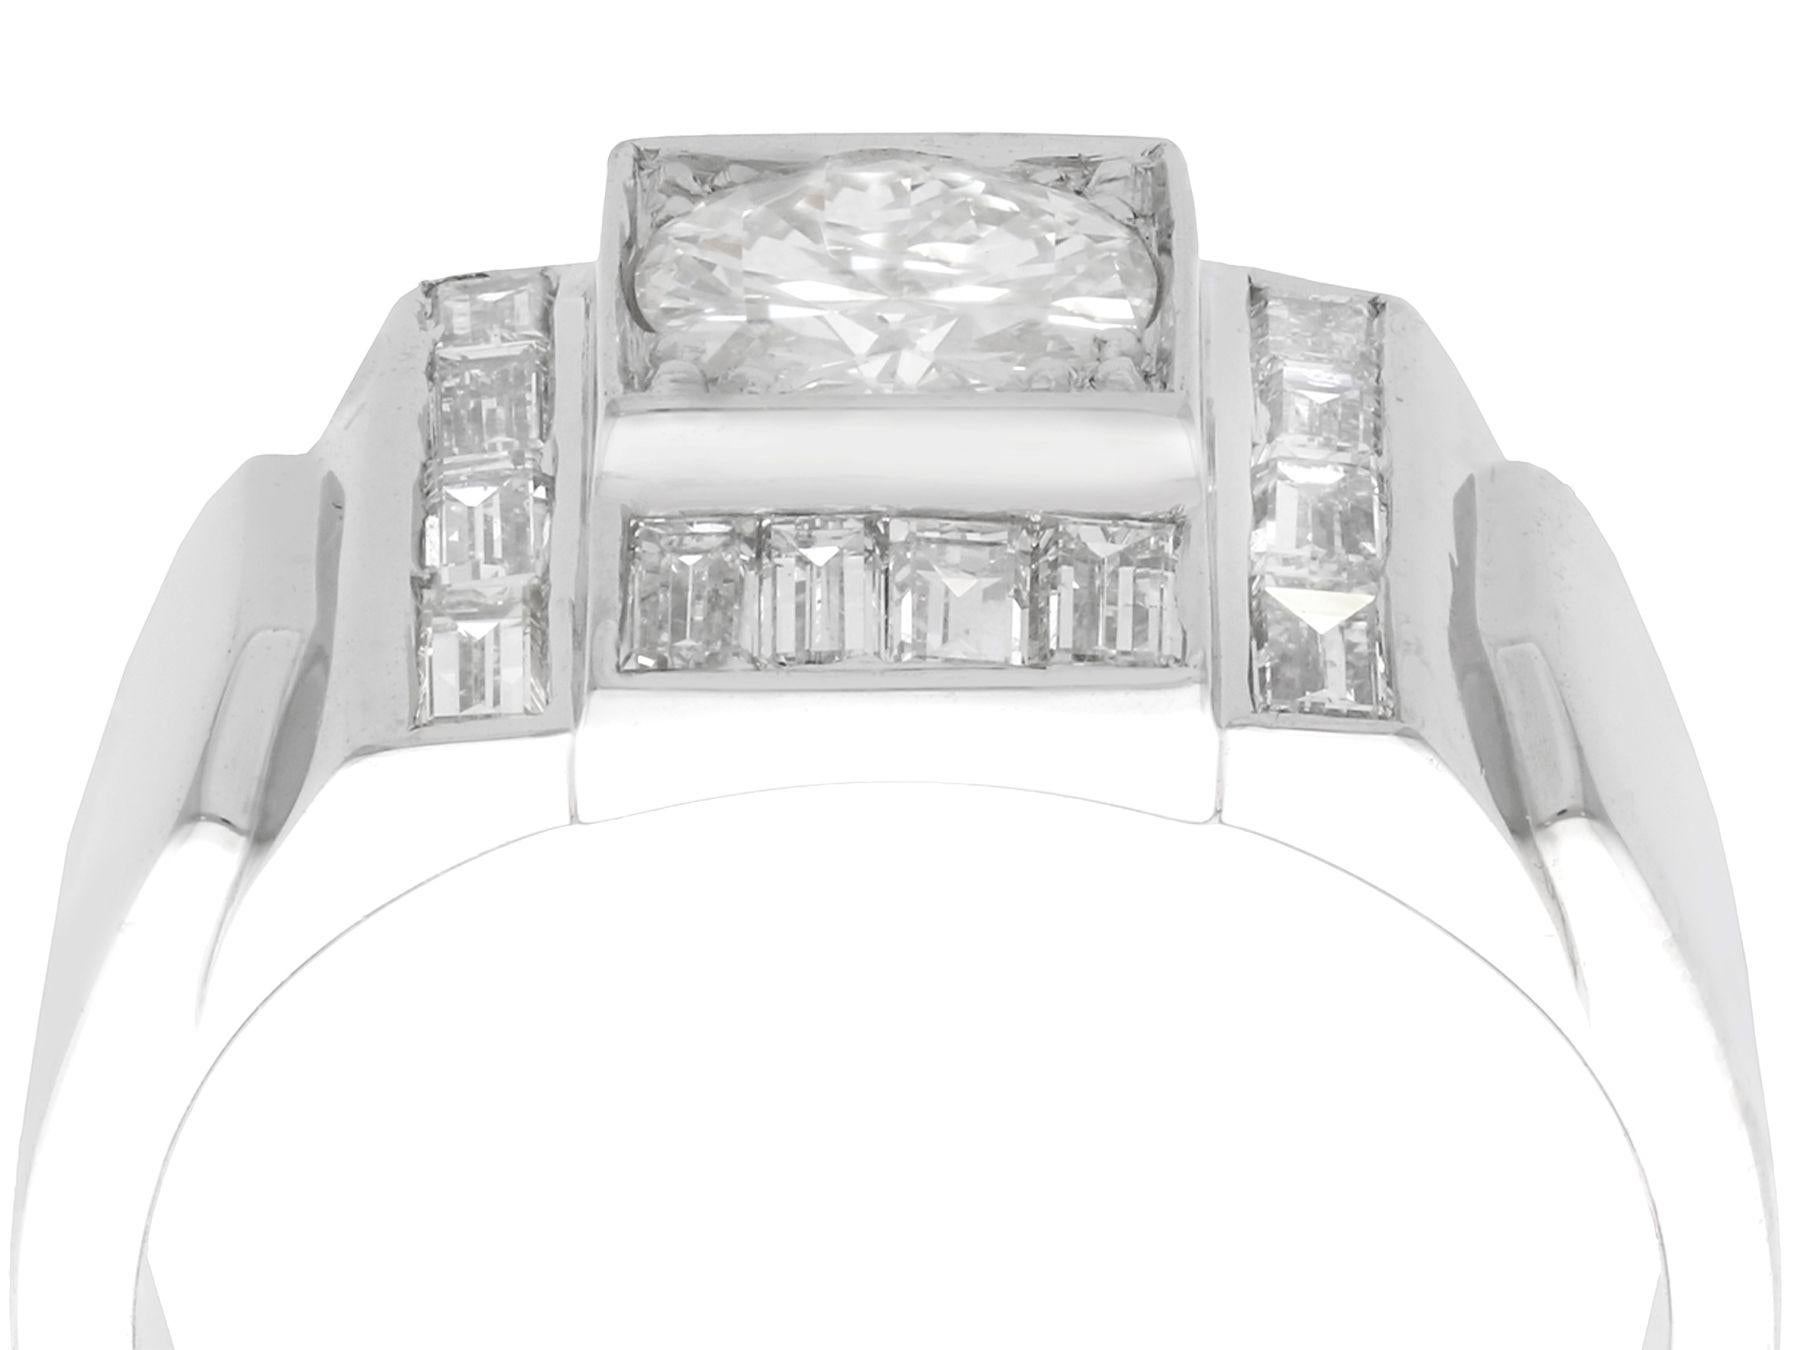 A stunning vintage French Art Deco 1.60 carat diamond and 18 karat white gold cocktail ring; part of our diverse jewelry and estate jewelry collections.

This stunning, fine and impressive Art Deco vintage diamond ring has been crafted in 18k white